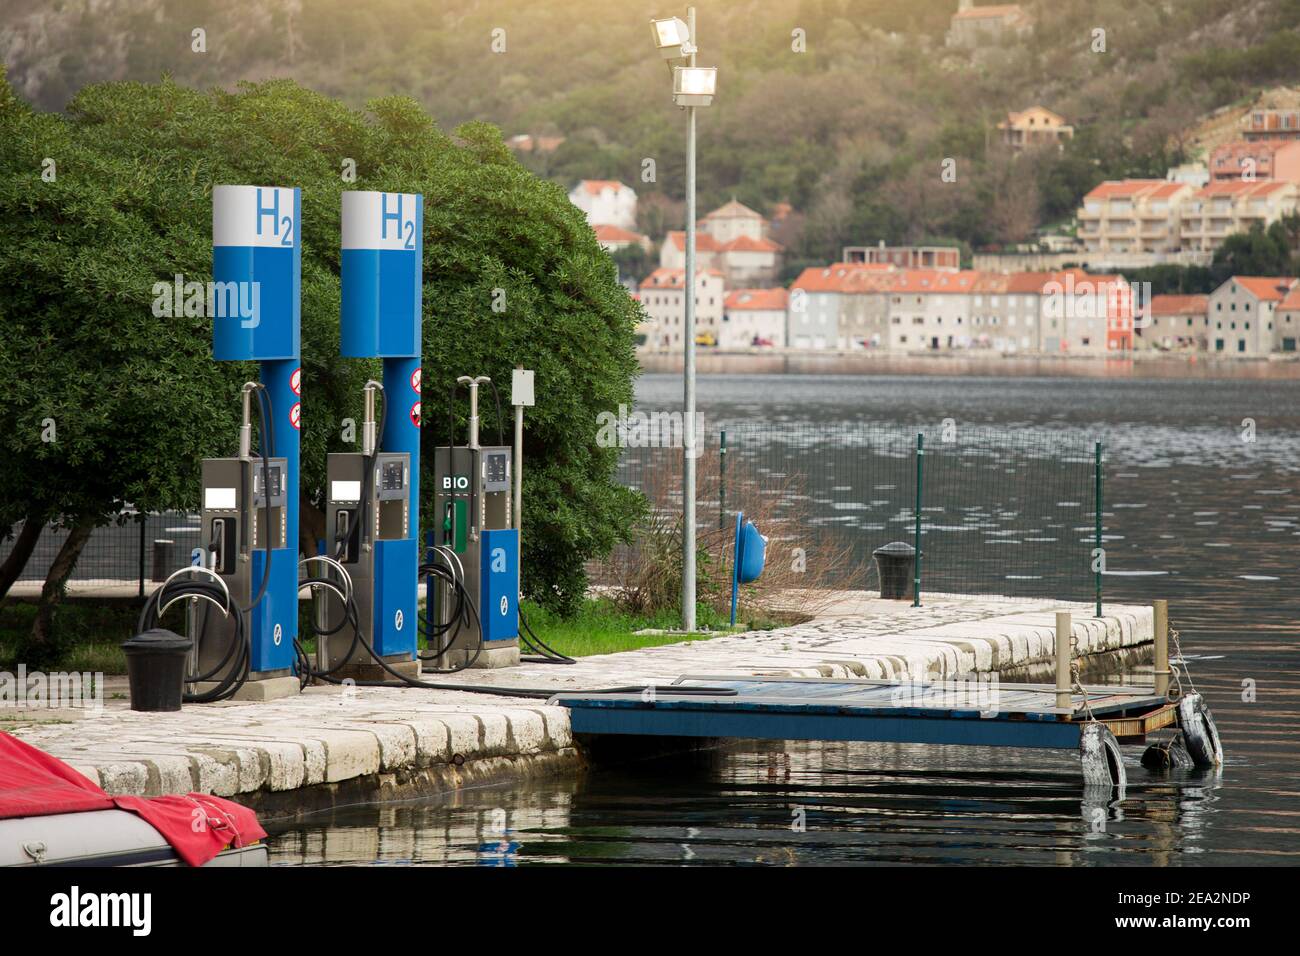 Hydrogen filling station for boats at the pier Stock Photo